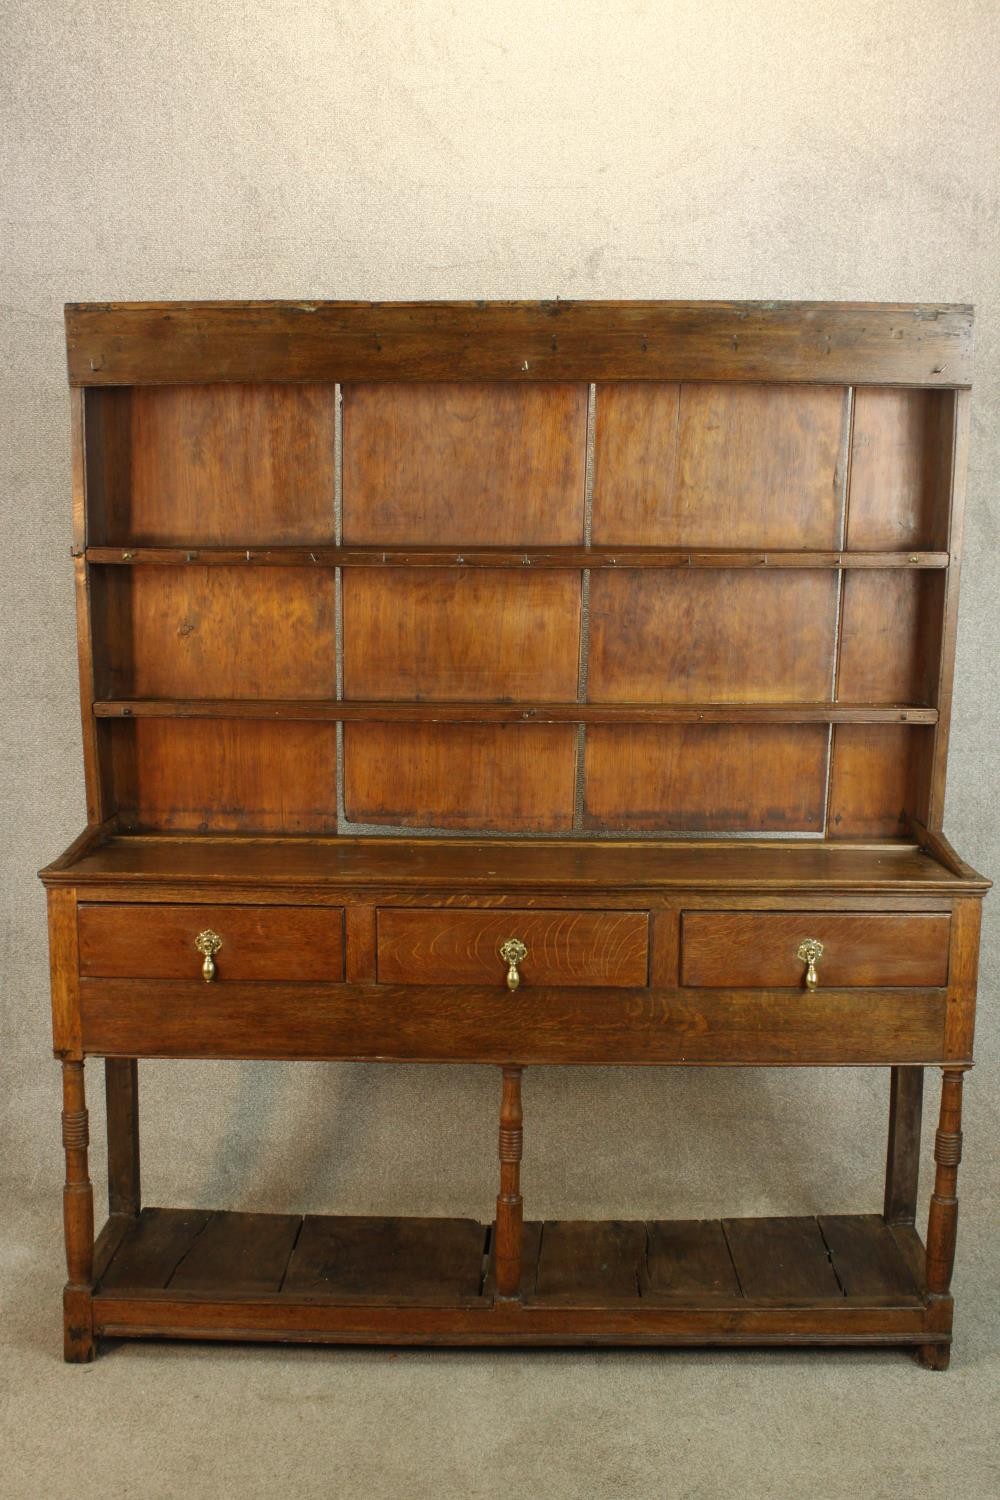 A 19th/early 20th century oak kitchen dresser, with plate rack back standing above three drawers